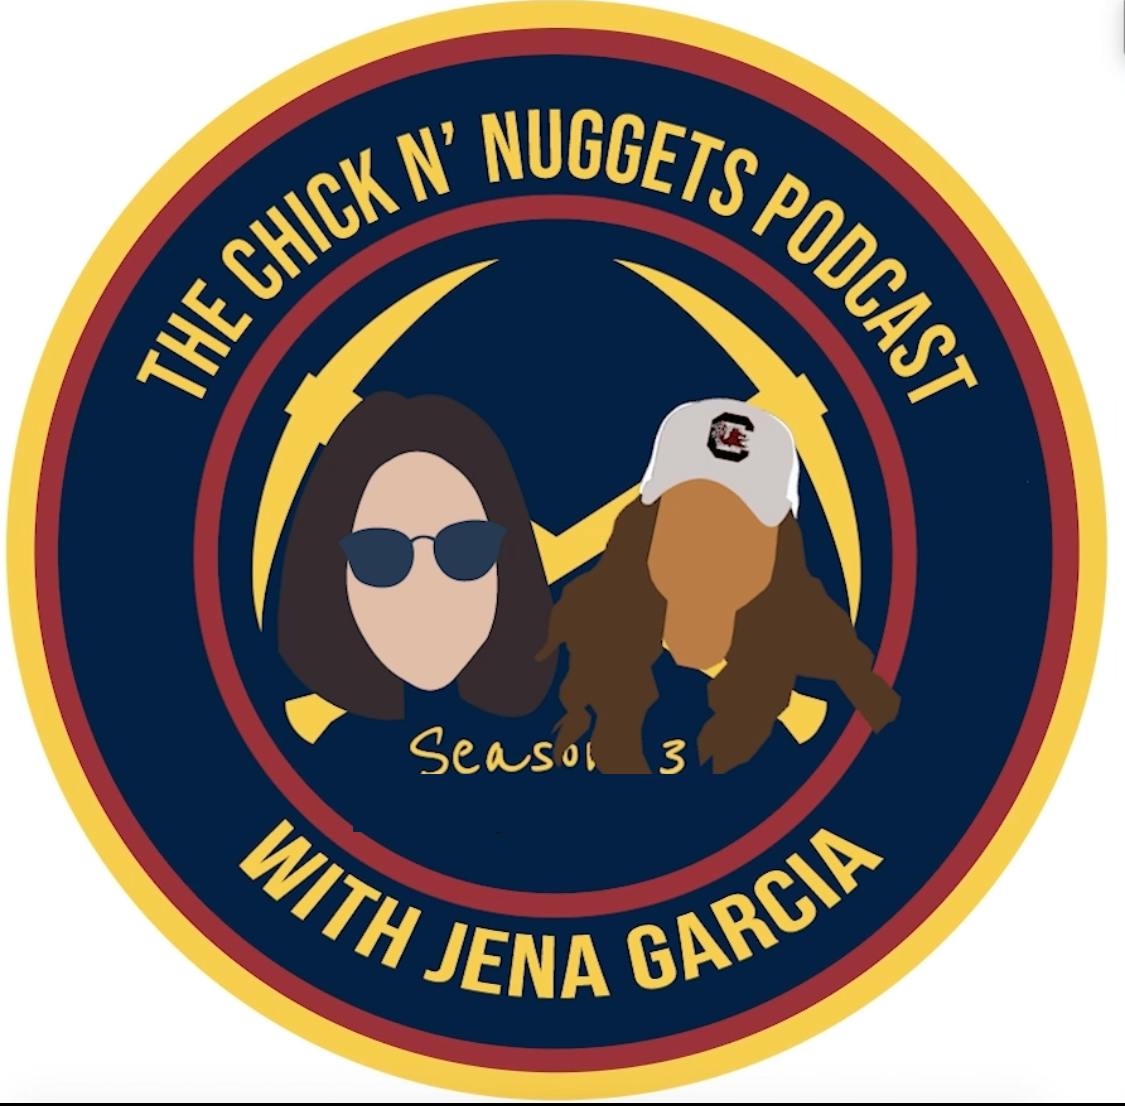 The Chick N' Nuggets Podcast